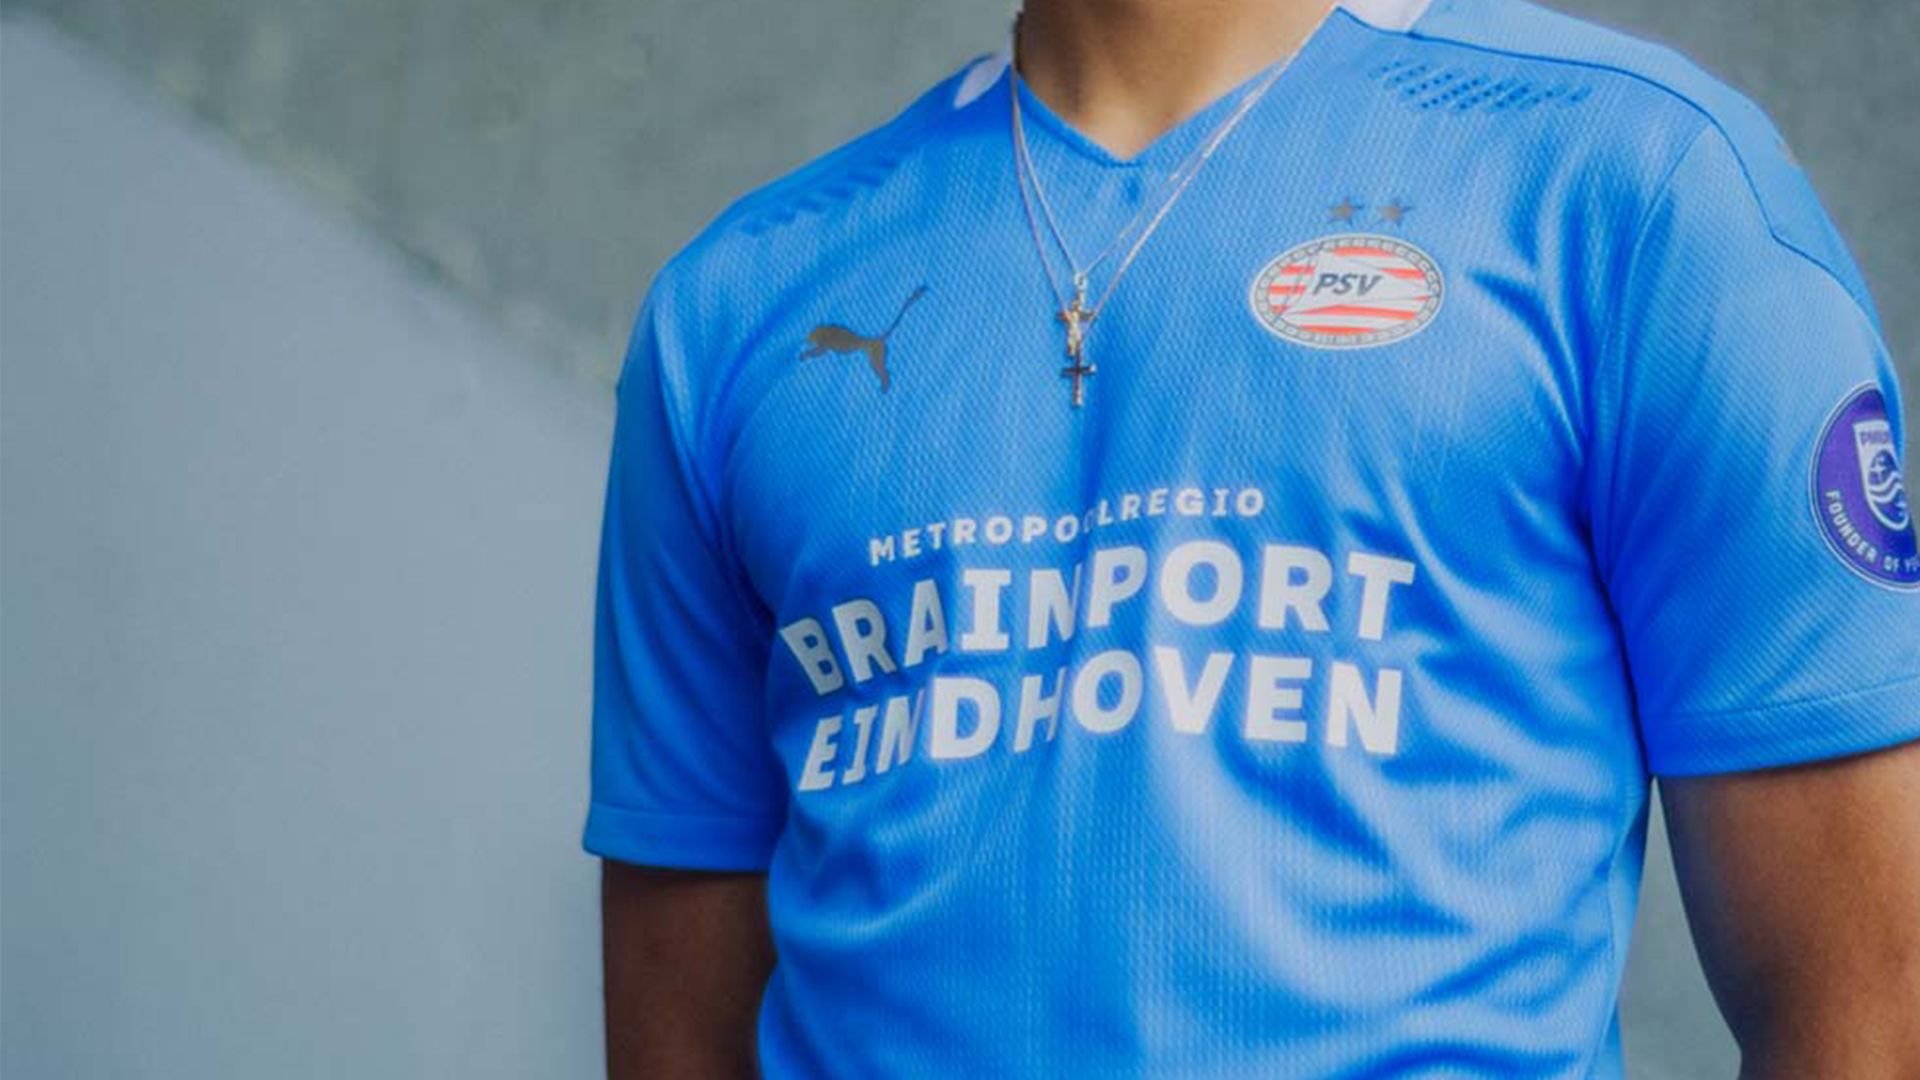 Official PSV shirt with Brainport Eindhoven as a partner